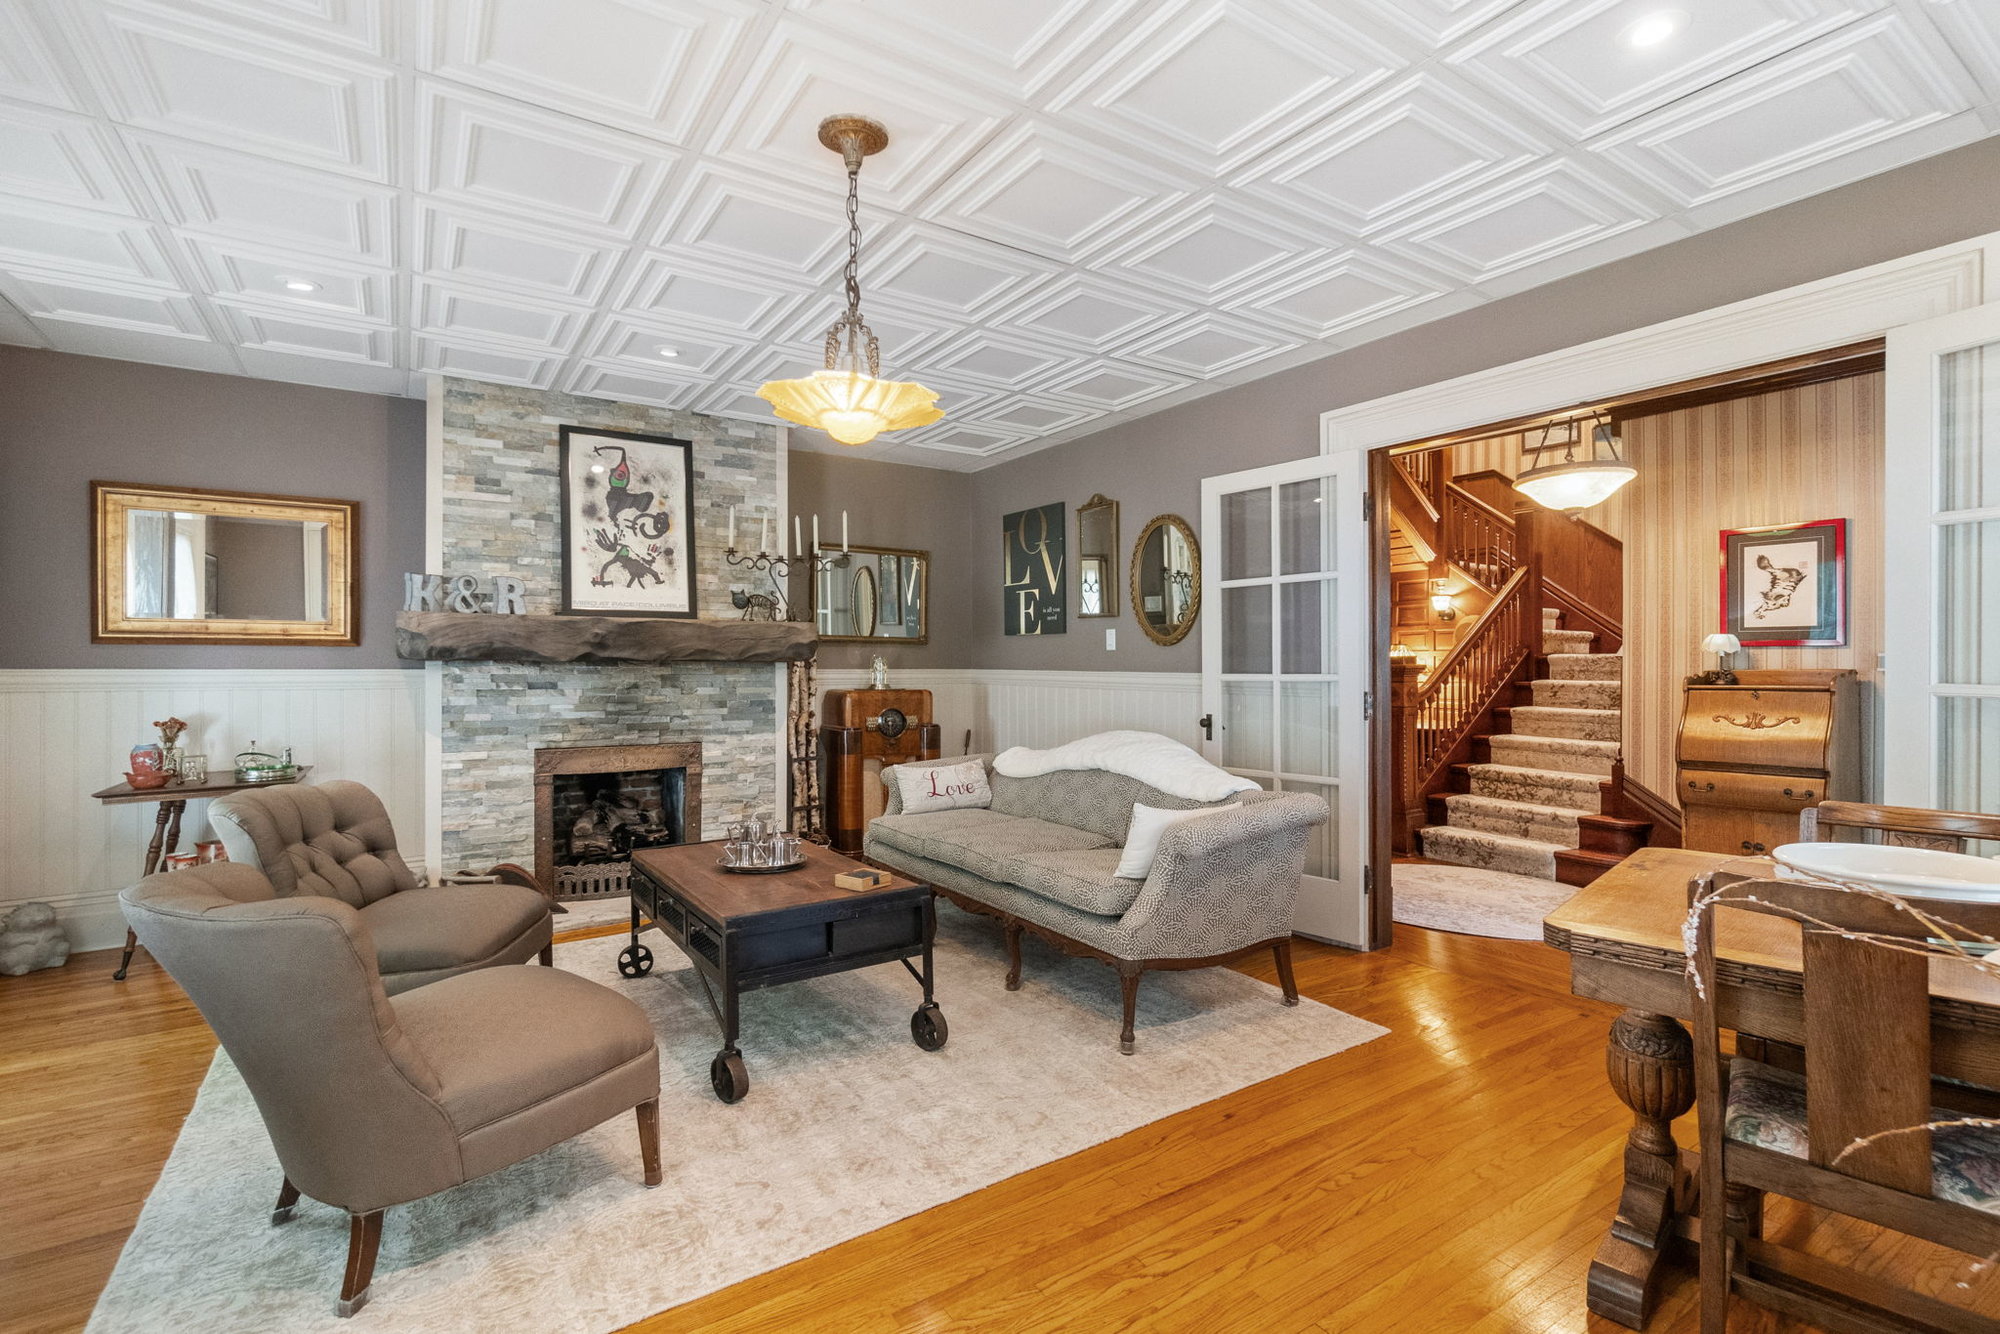 Historic Old World Charm and Character Abounds in this Beautiful Cedar Falls Home